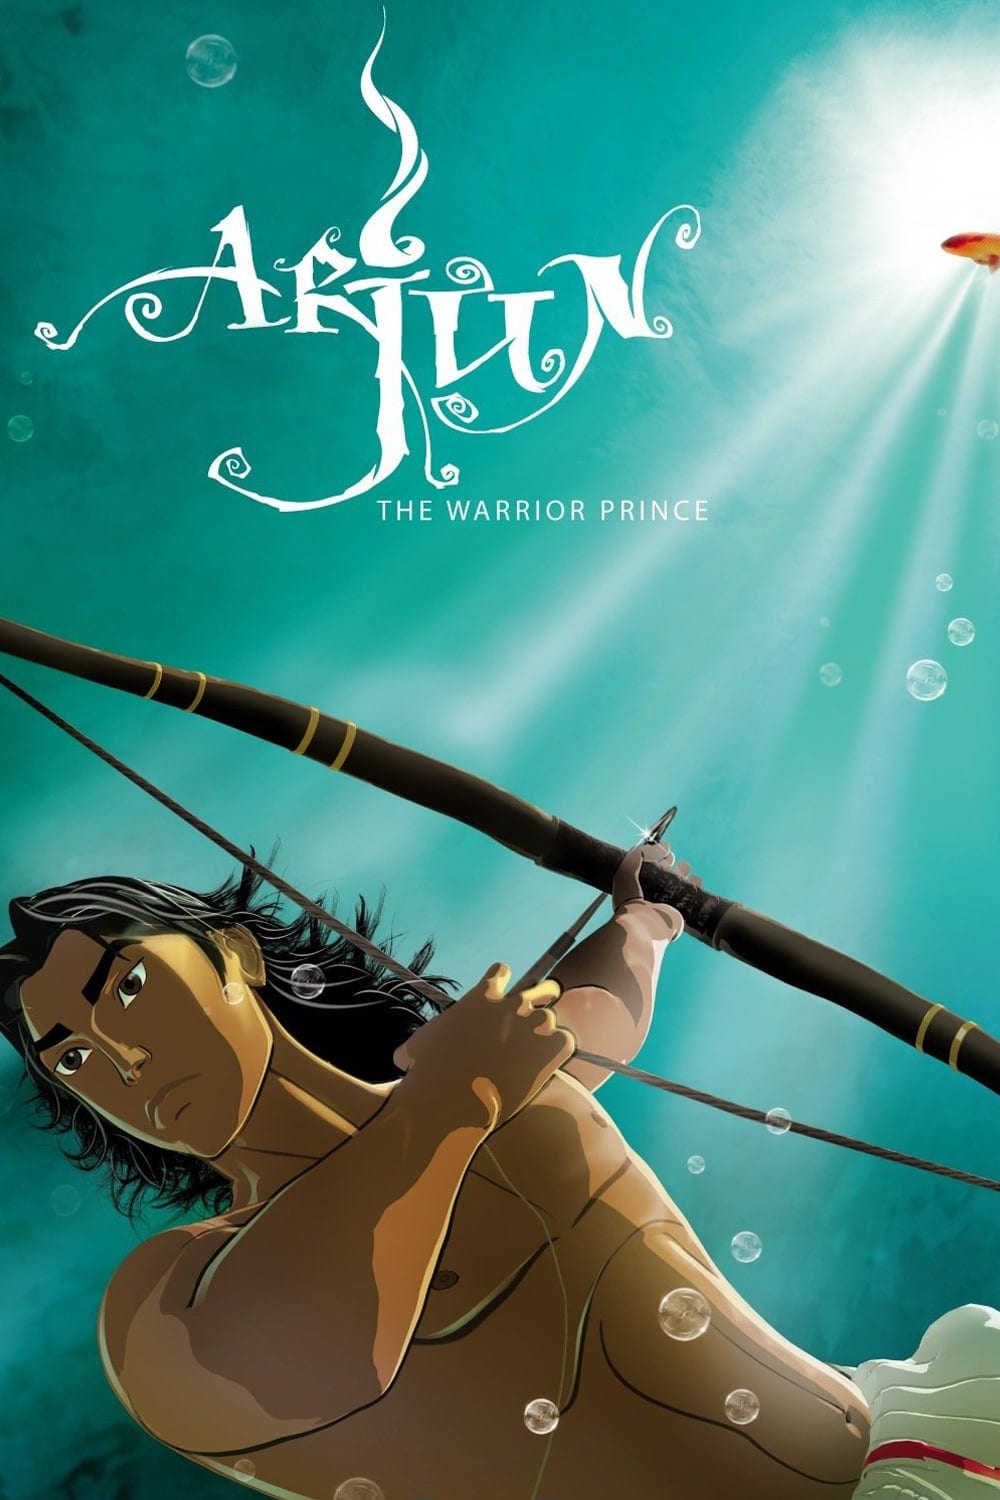 Poster for the movie "Arjun: The Warrior Prince"